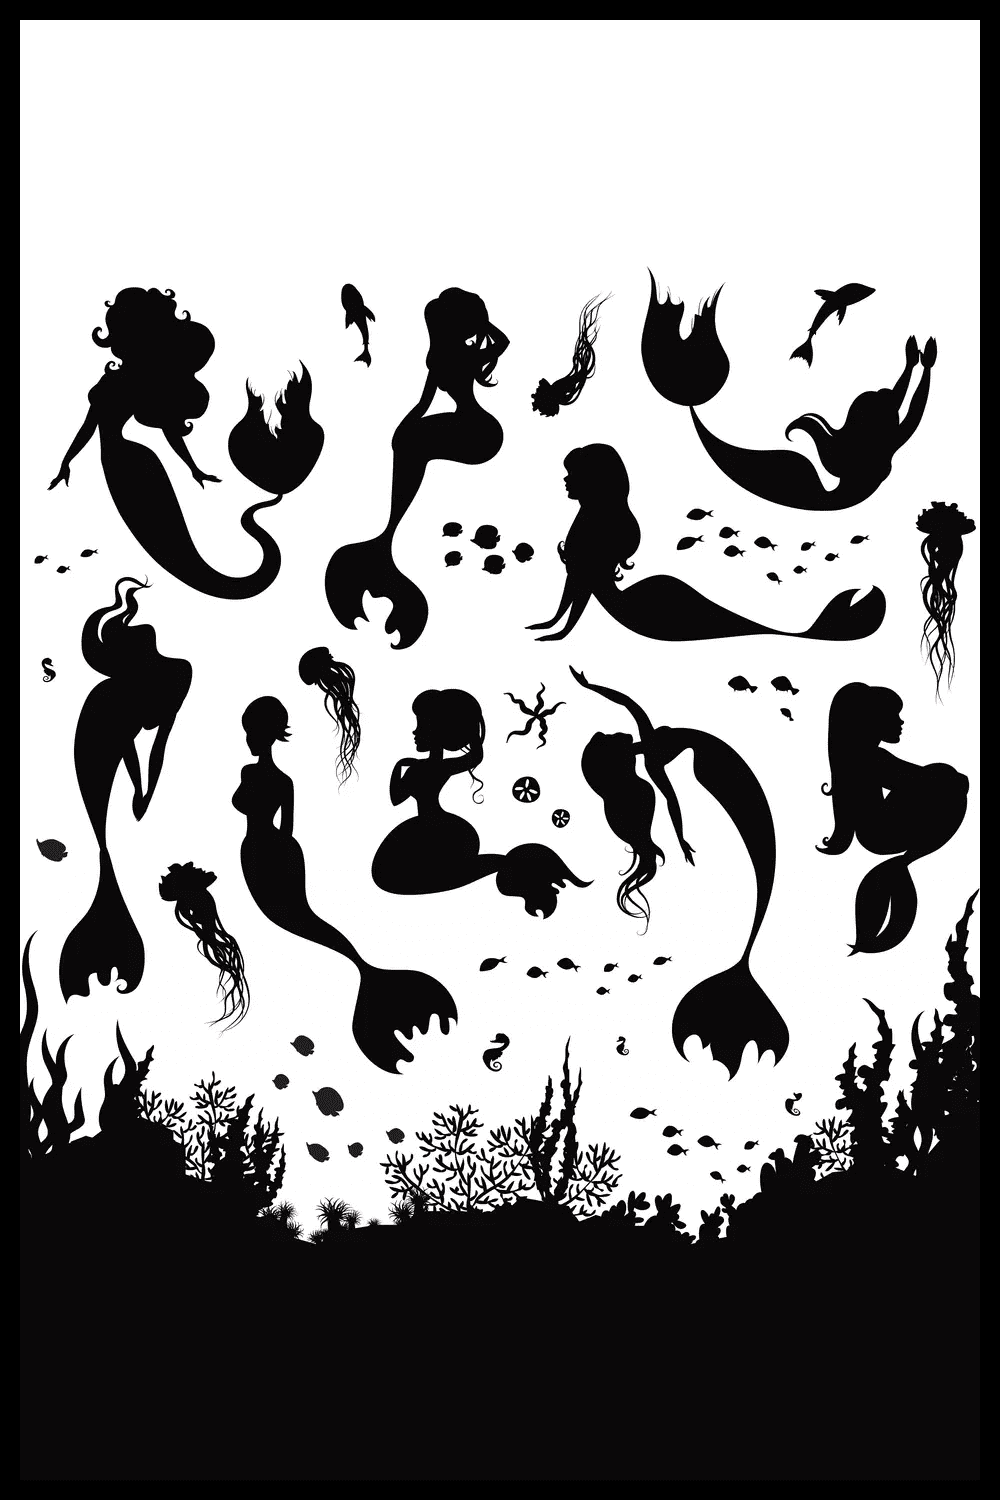 Mermaid silhouettes in different poses at the bottom of the sea.